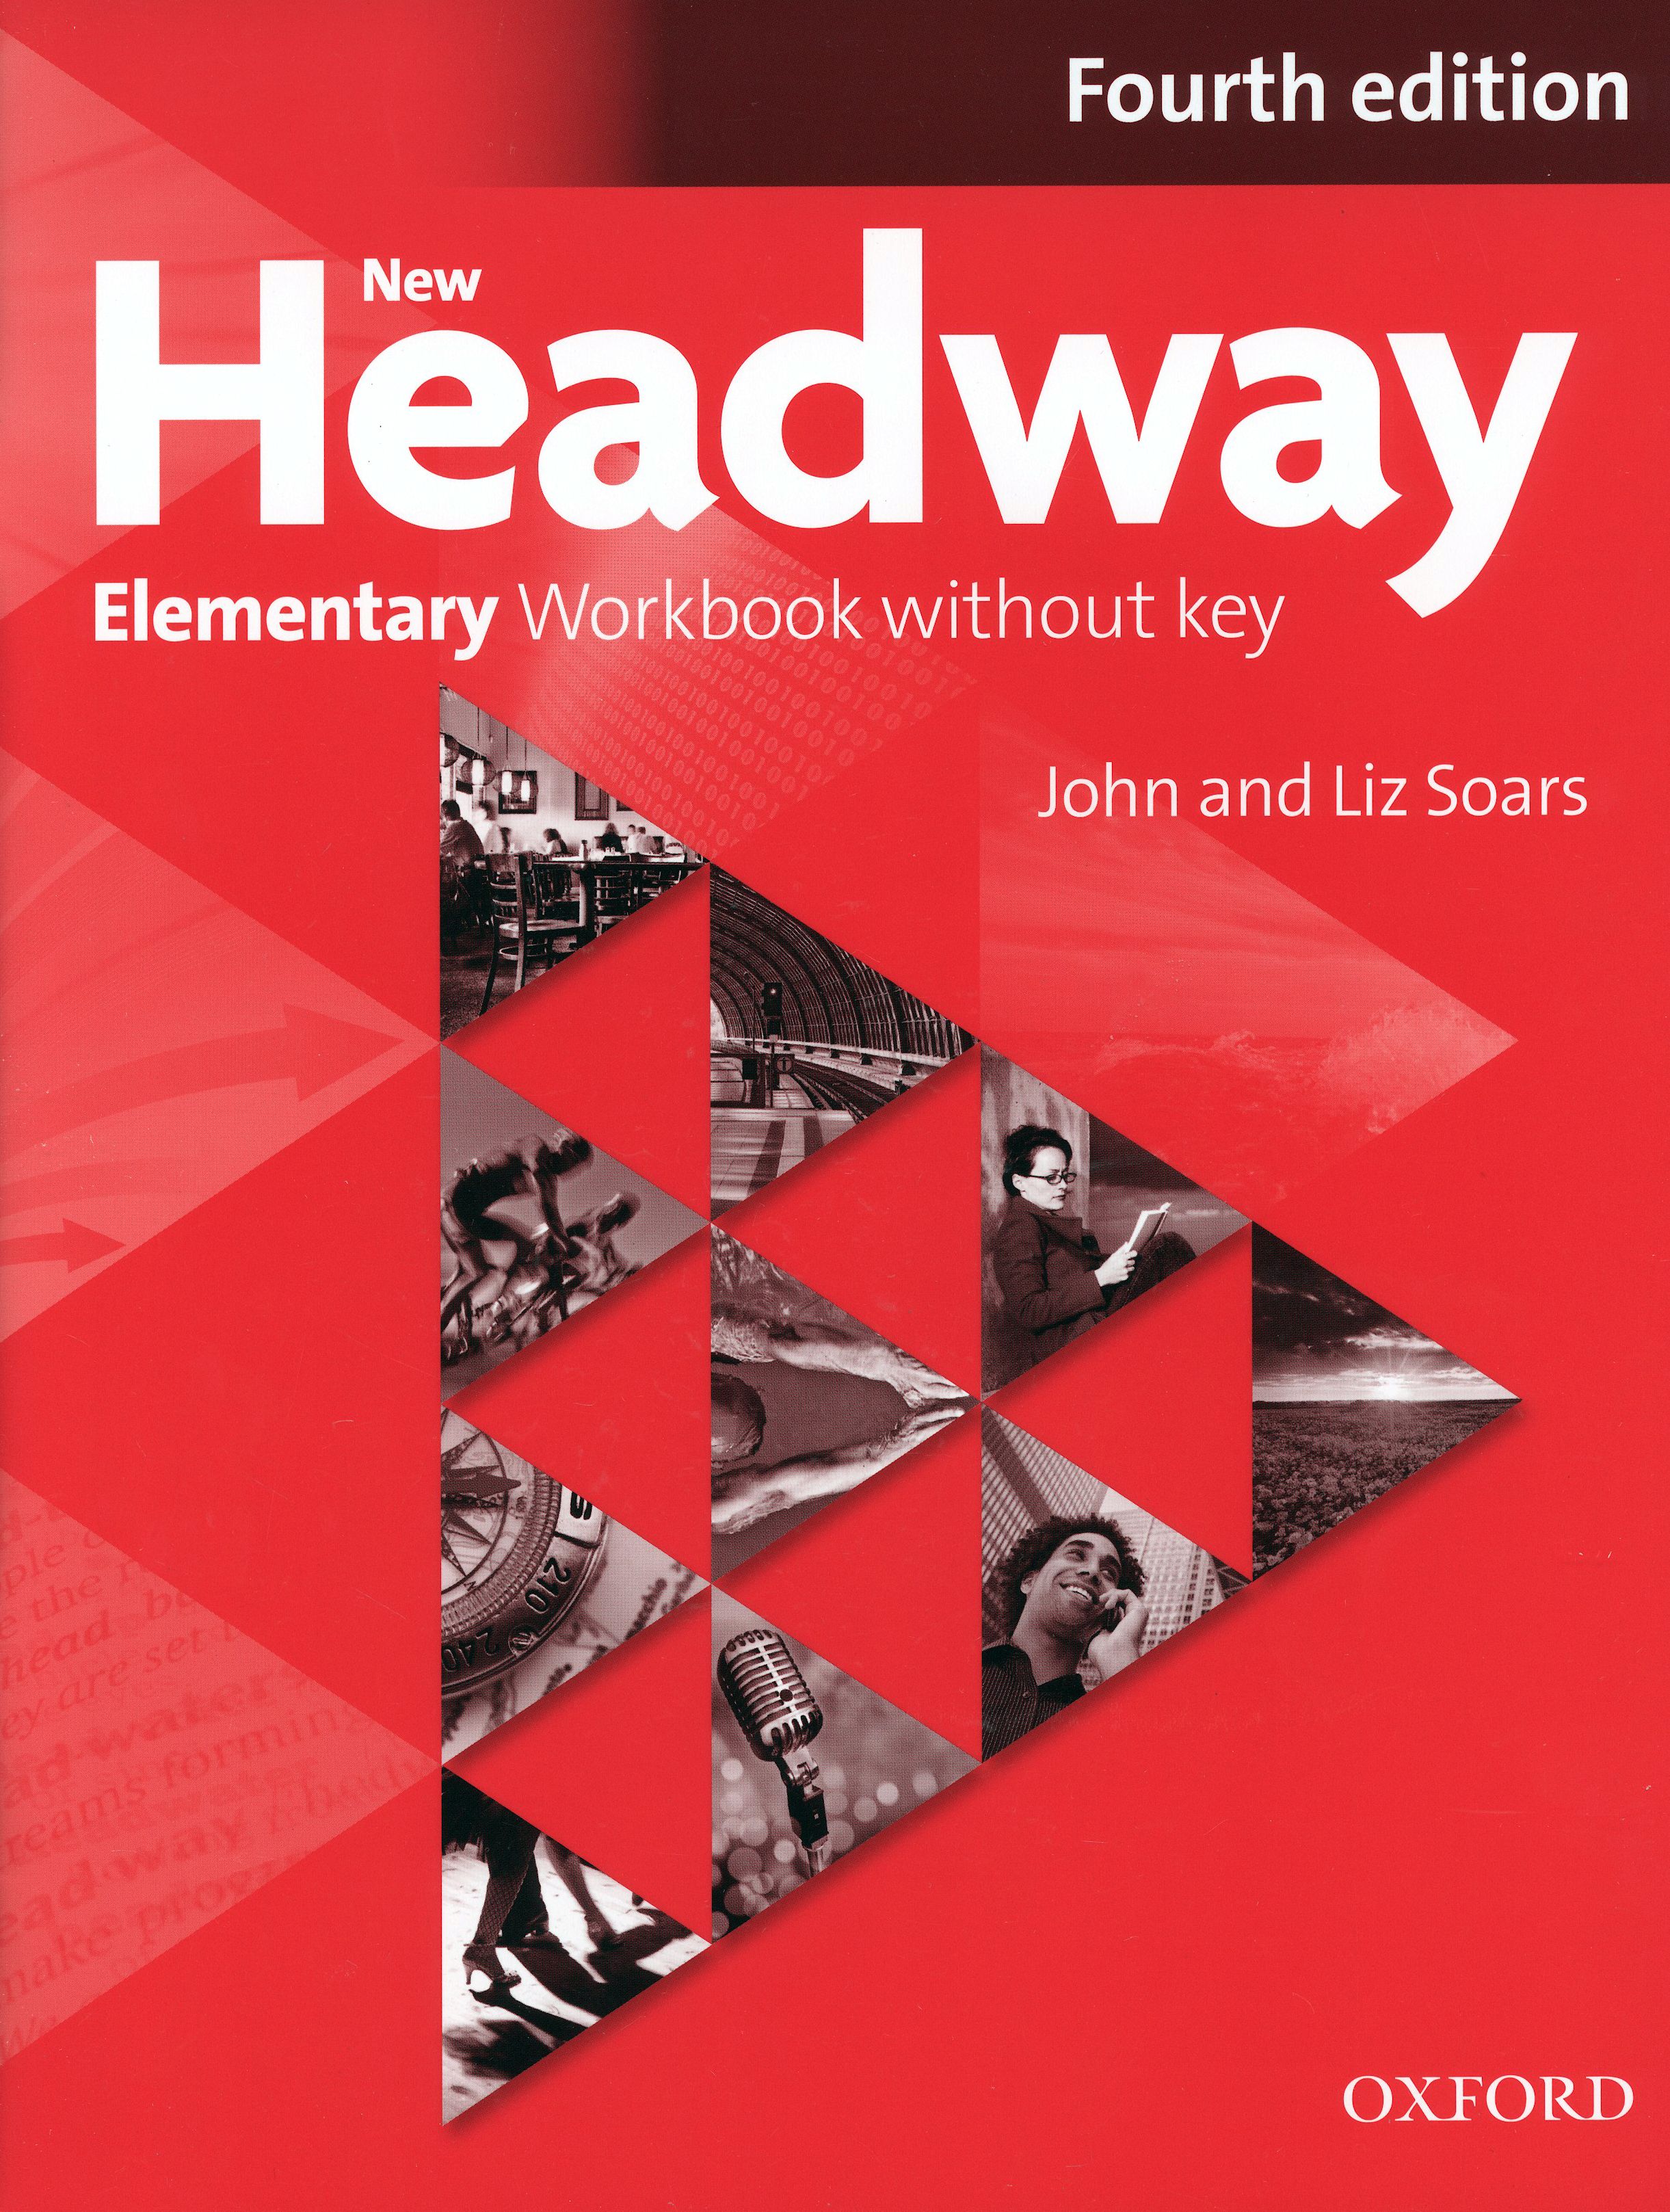 Elementary 4 edition. New Headway Elementary 5th Edition. New Headway Elementary 4 Edition. Headway Elementary 4th Edition. New Headway Elementary 3rd Edition.